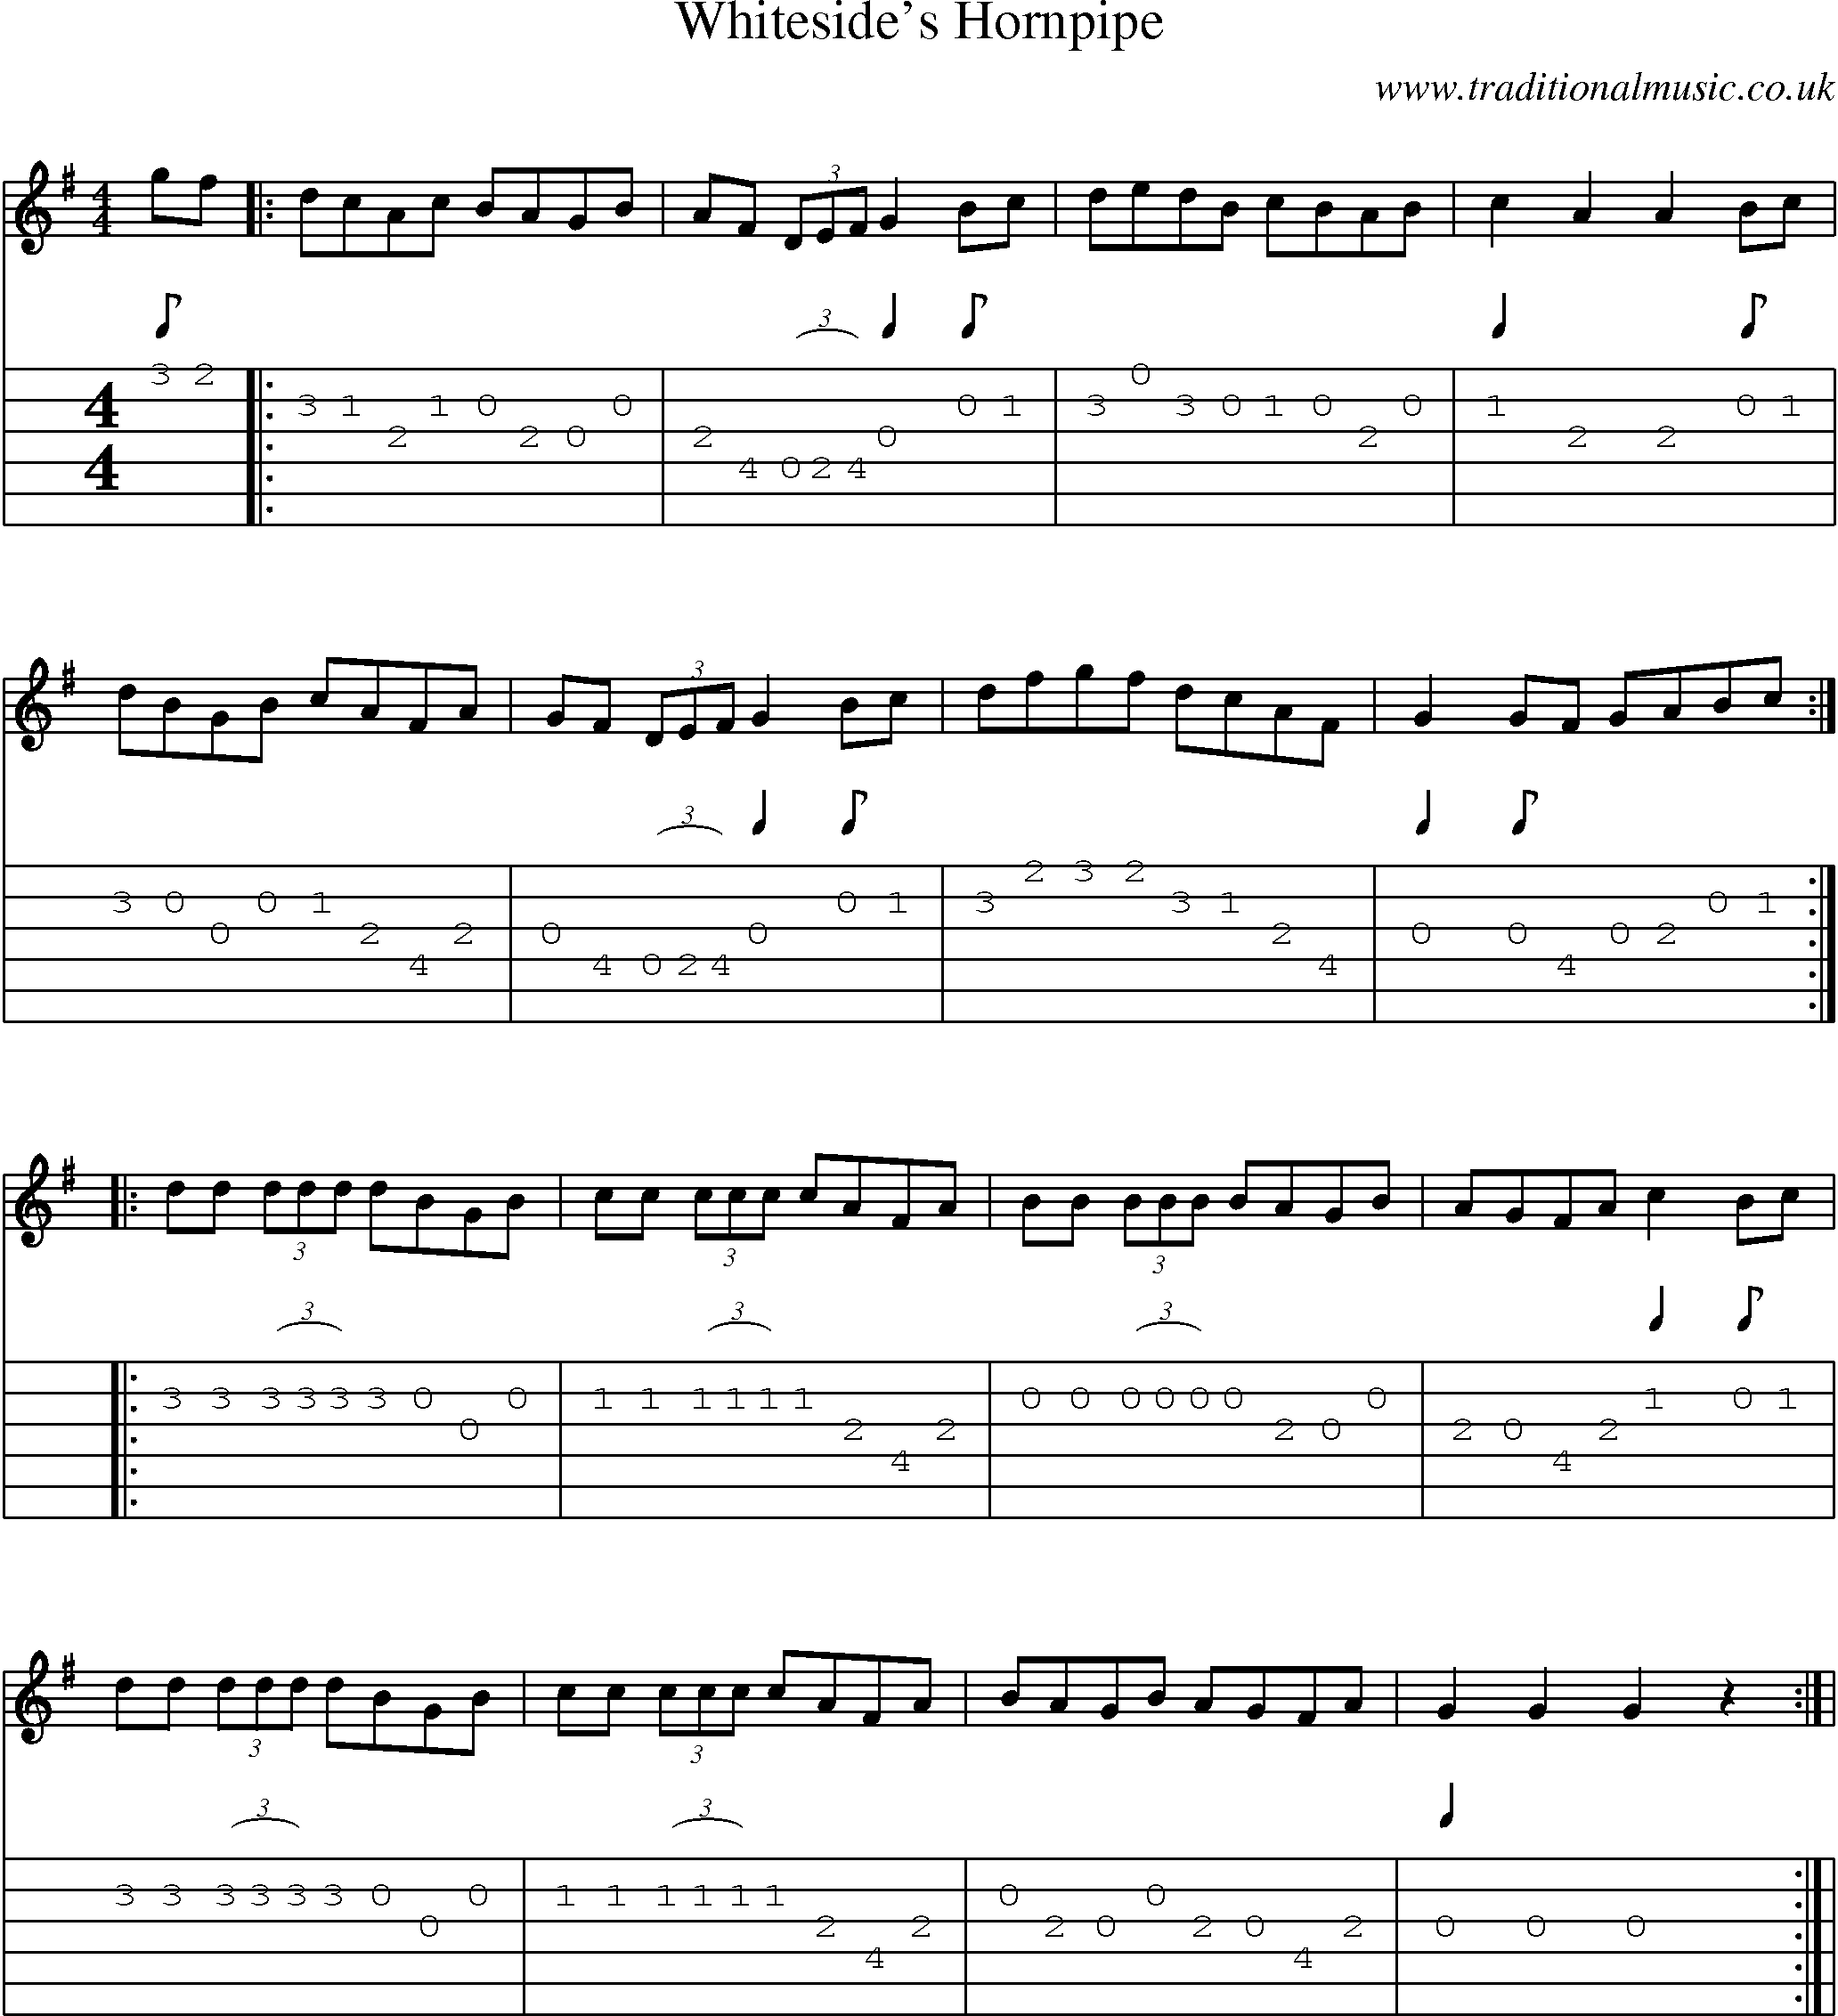 Music Score and Guitar Tabs for Whitesides Hornpipe